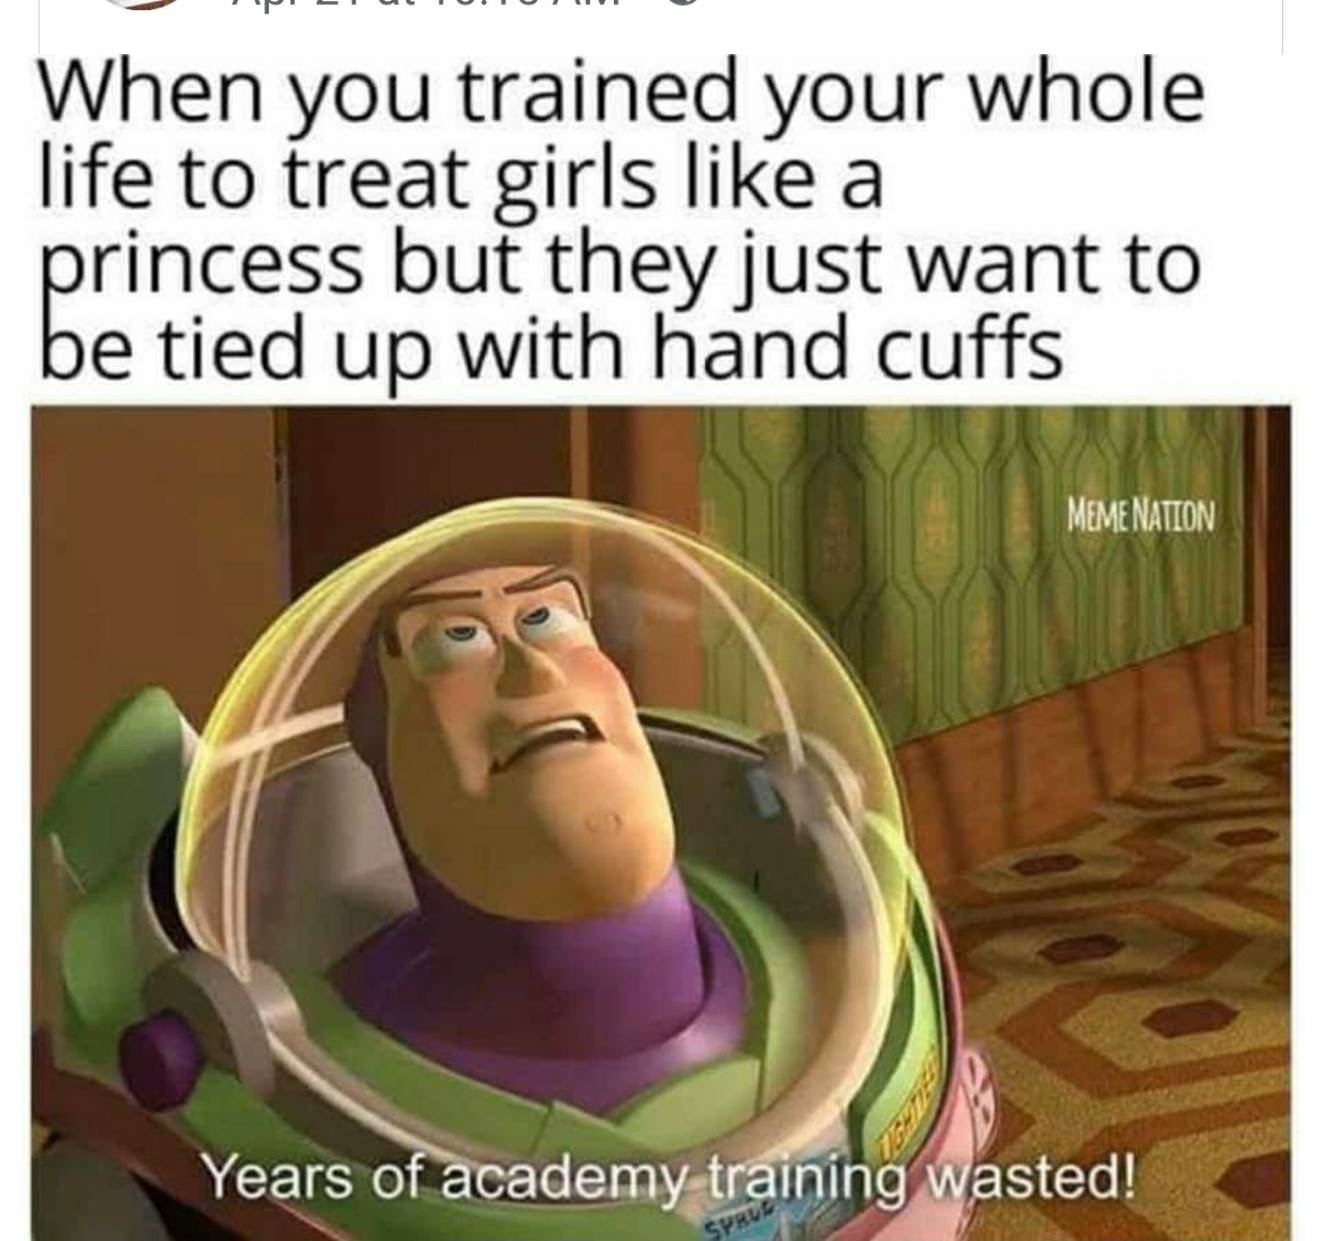 vet nurse memes - When you trained your whole life to treat girls a princess but they just want to be tied up with hand cuffs Meme Nation Years of academy training wasted! Sprue